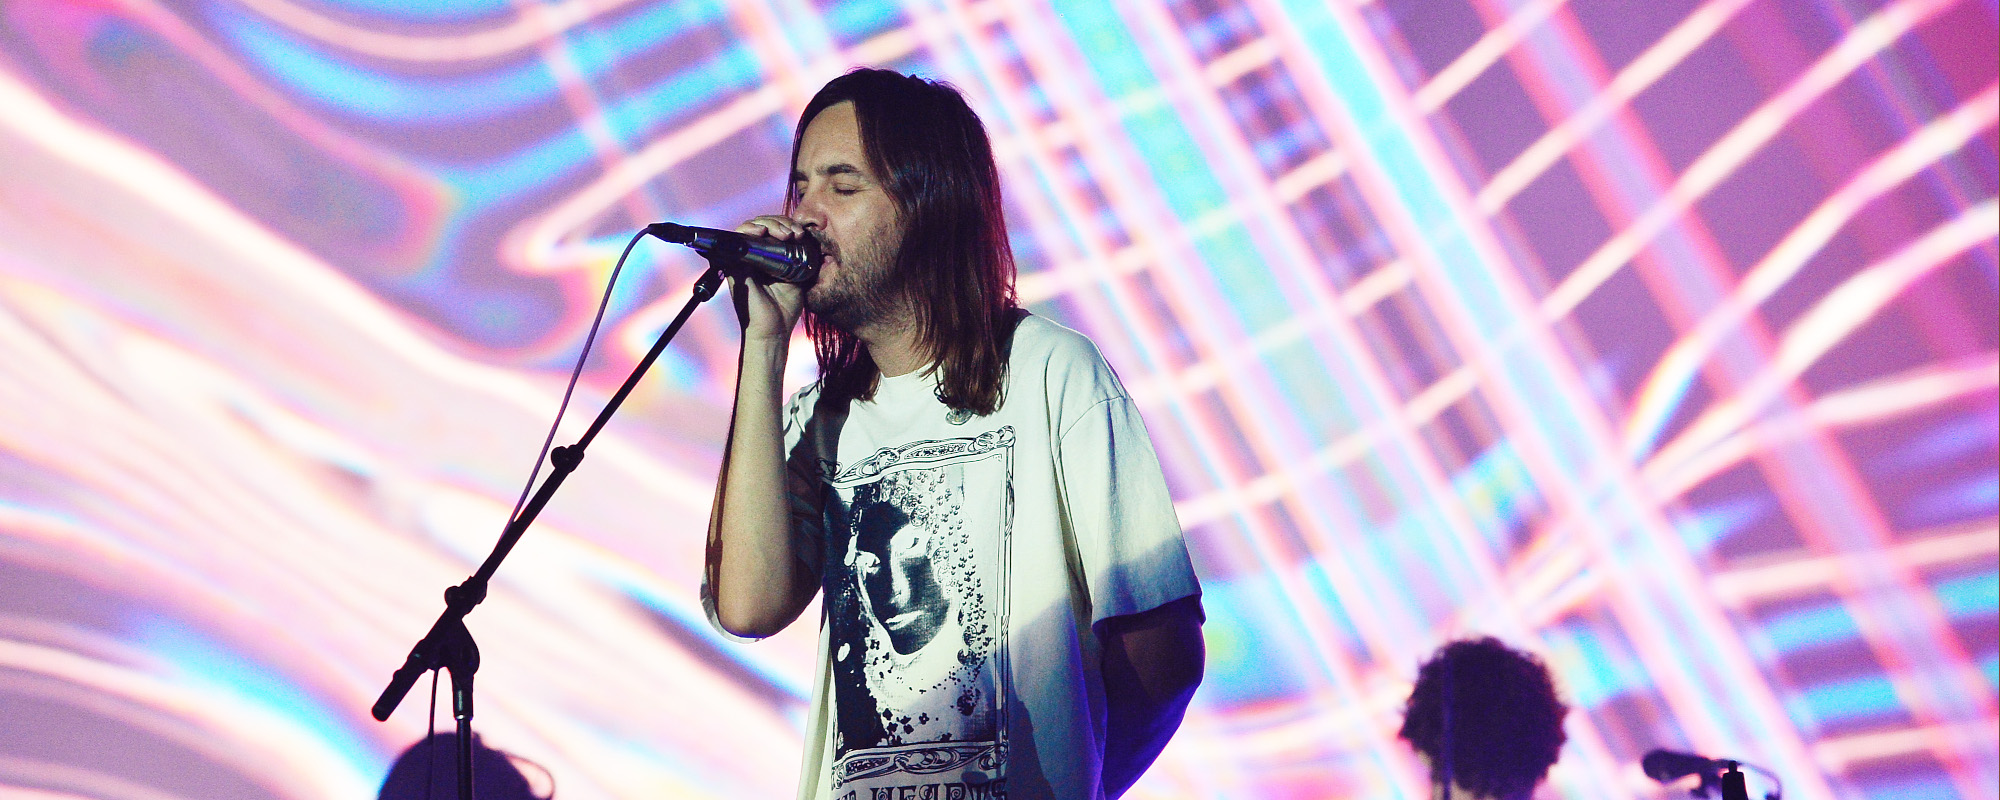 2 Songs You Didn’t Know Kevin Parker of Tame Impala Wrote for Other Artists